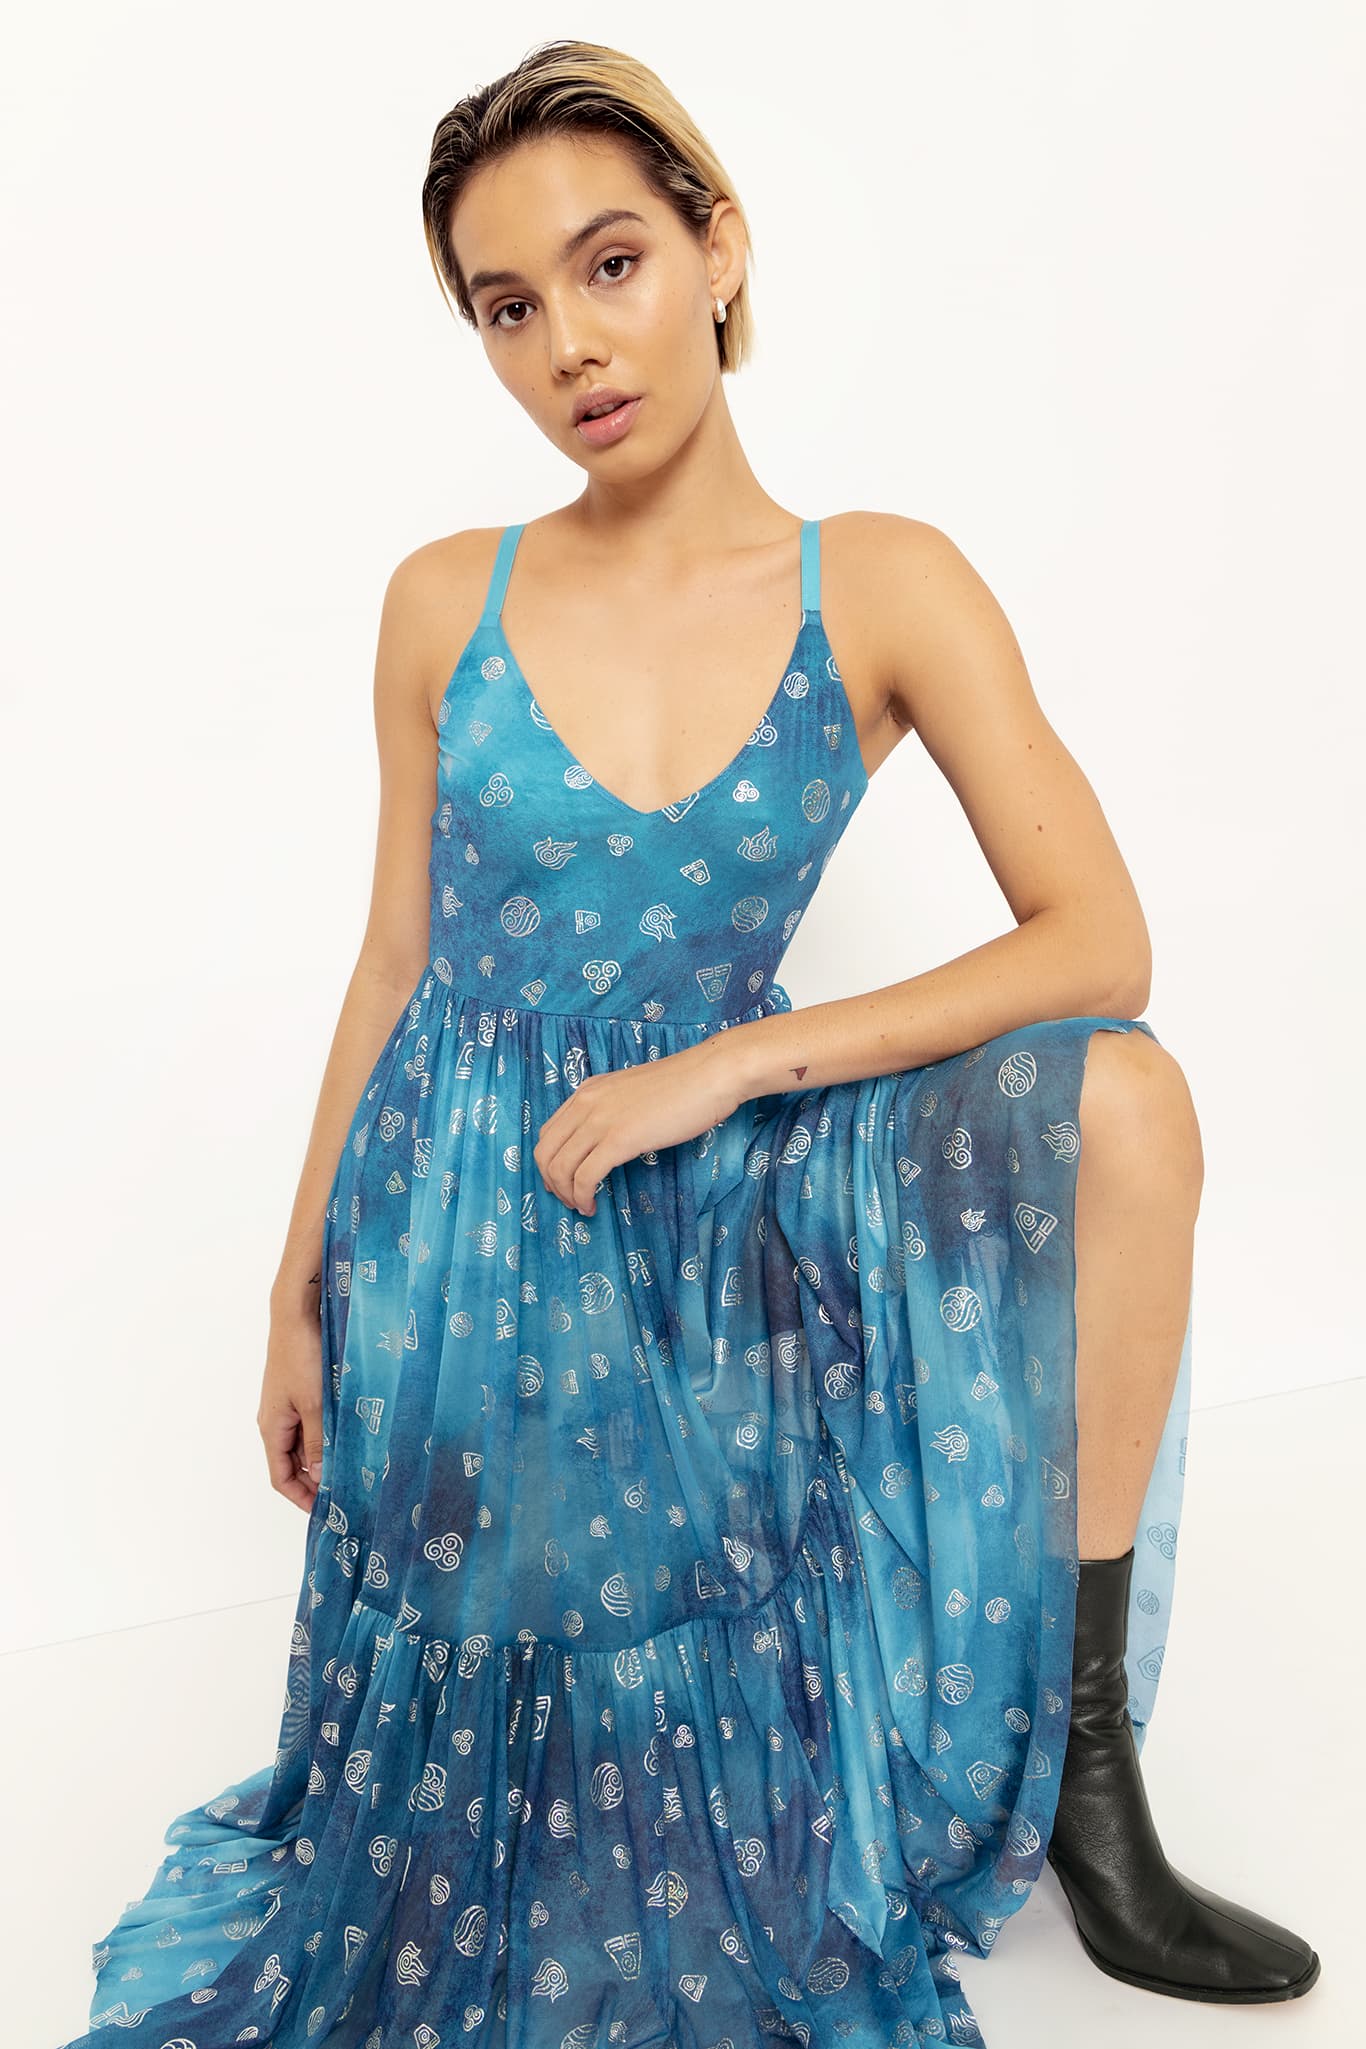 Earth Air Fire Water Sheer Midaxi Dress - Limited